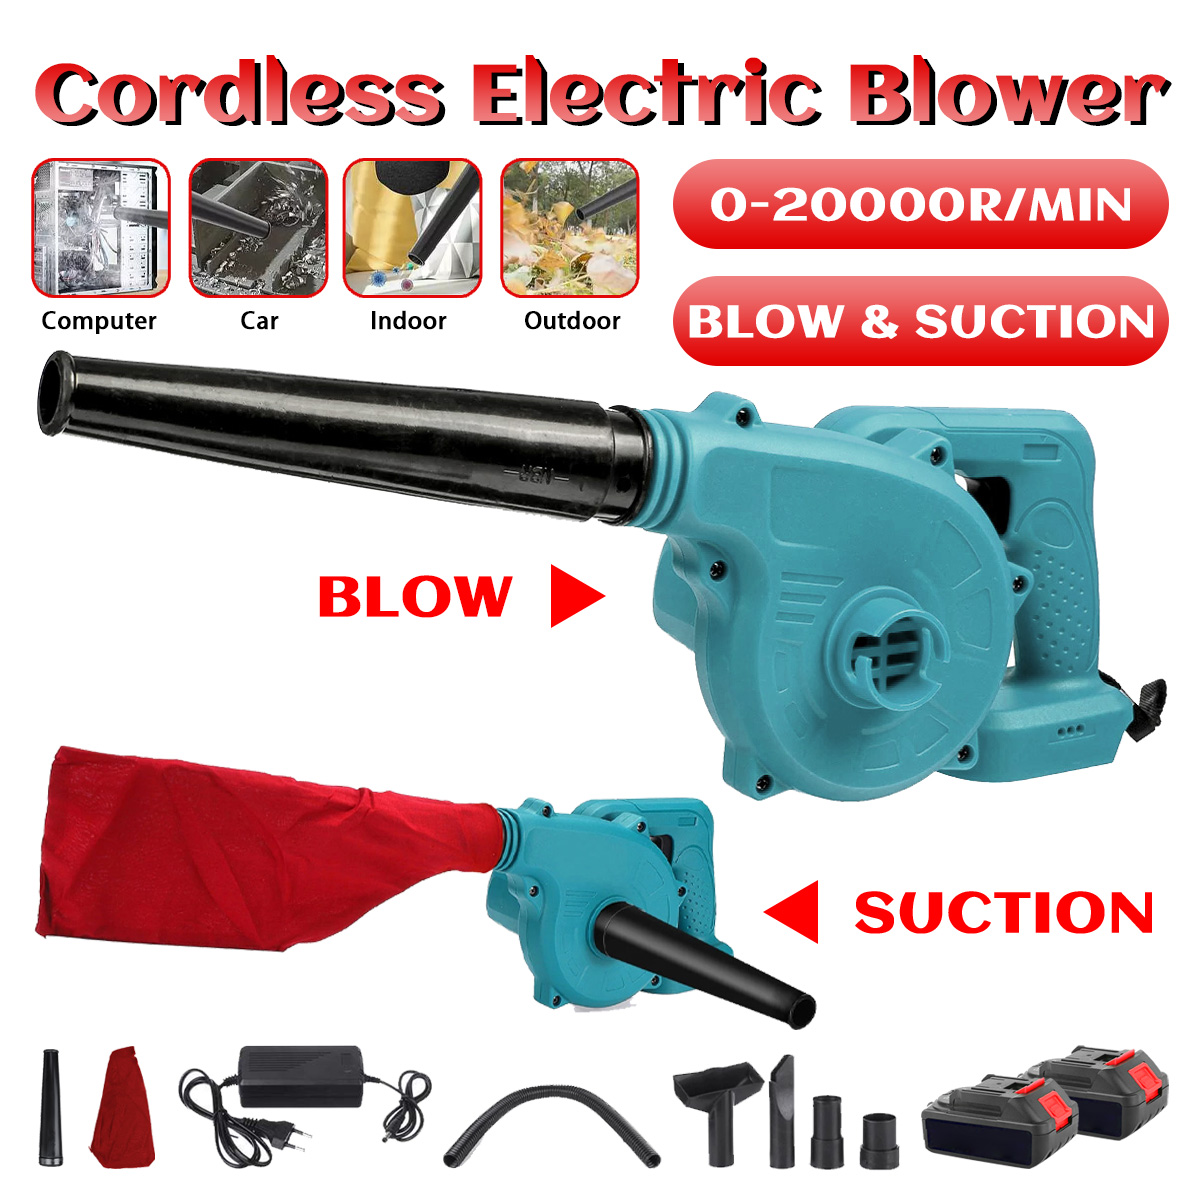 1600W-2-In-1-Cordless-Electric-Air-Blower-Dust-Leaf-Cleaner-Vacuum-Cleannig-Blowing-Tool-W-None12-Ba-1860307-3